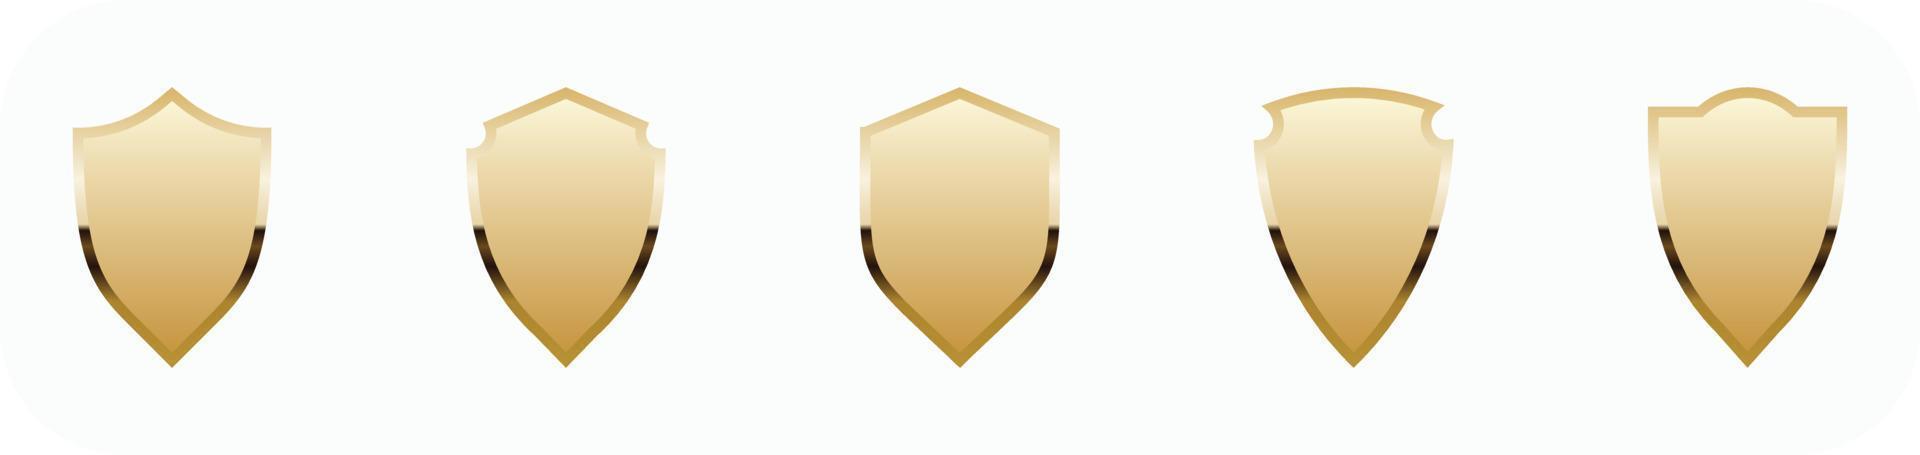 Security gold color badge icon EPS10 - Vector